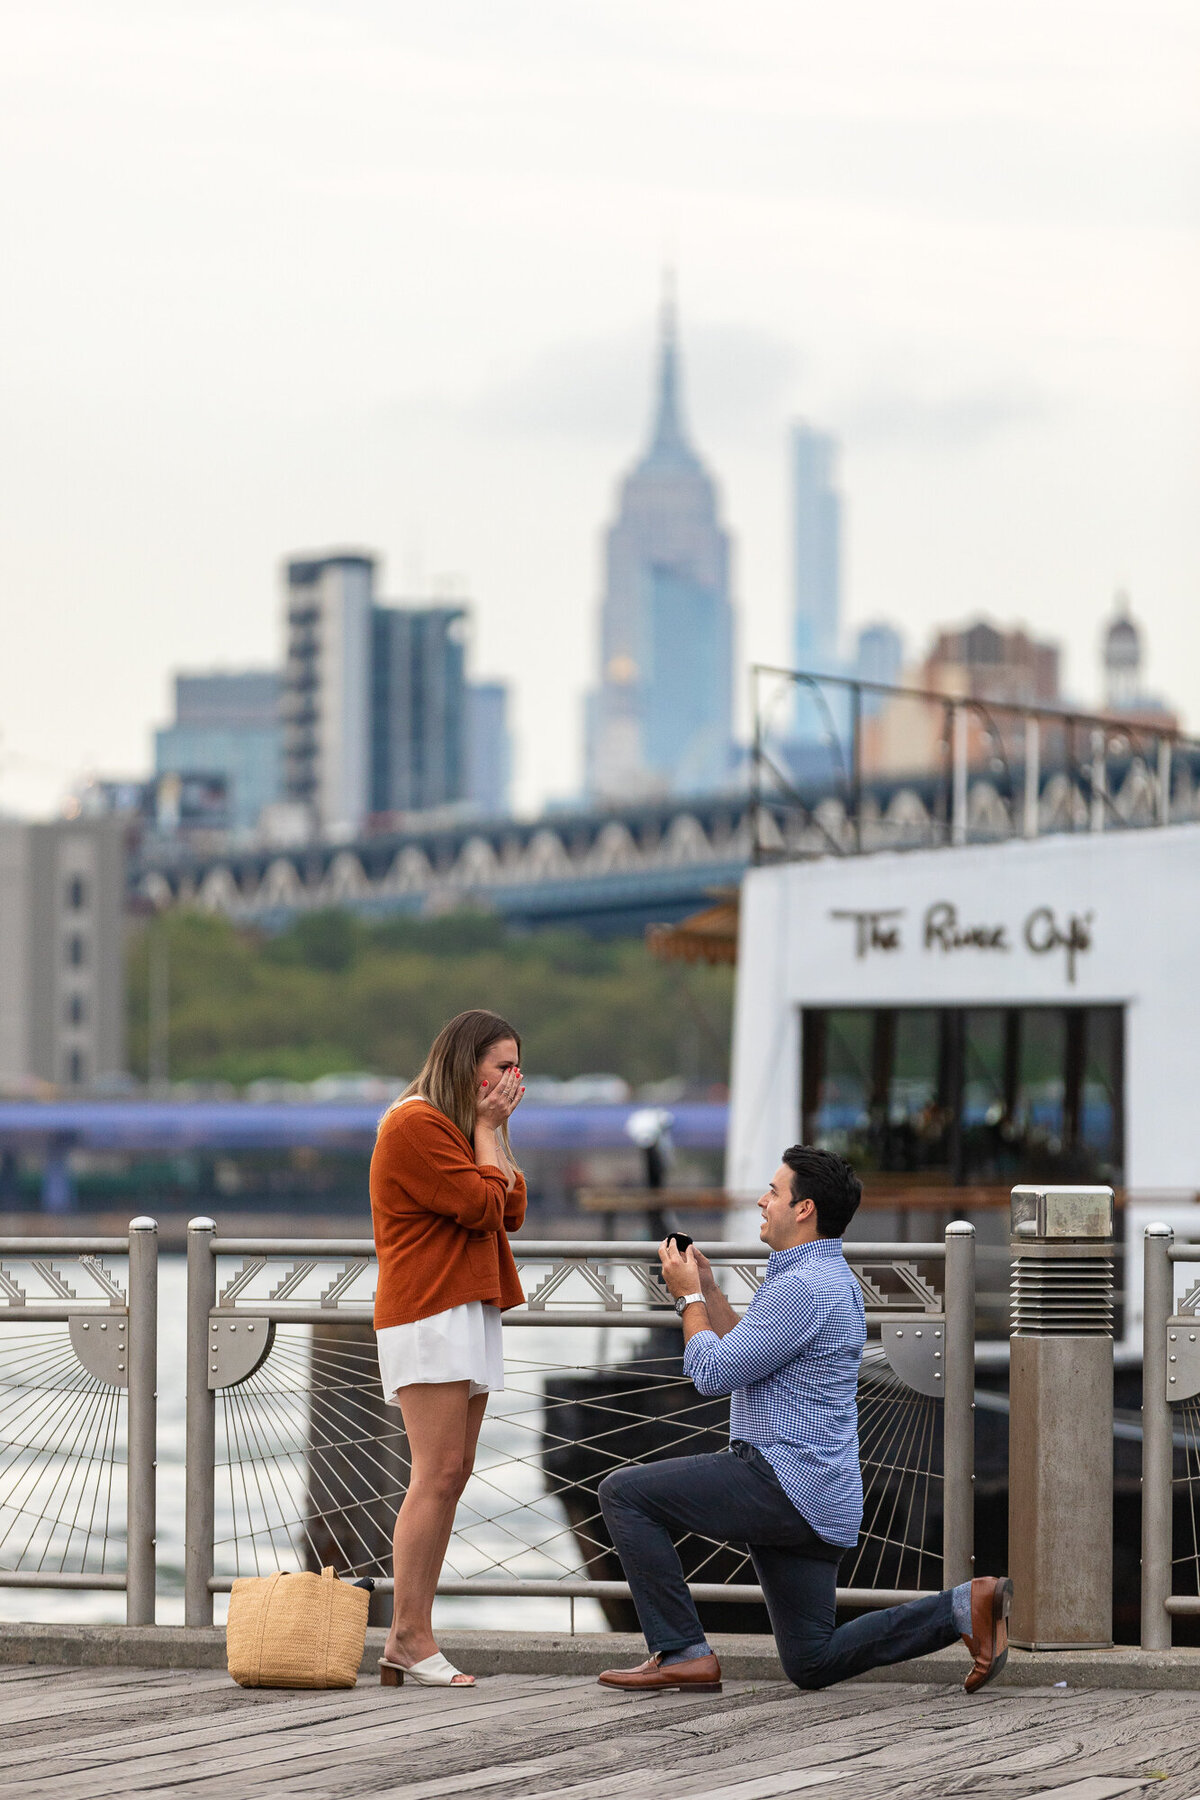 A person kneeling down and proposing to their partner.